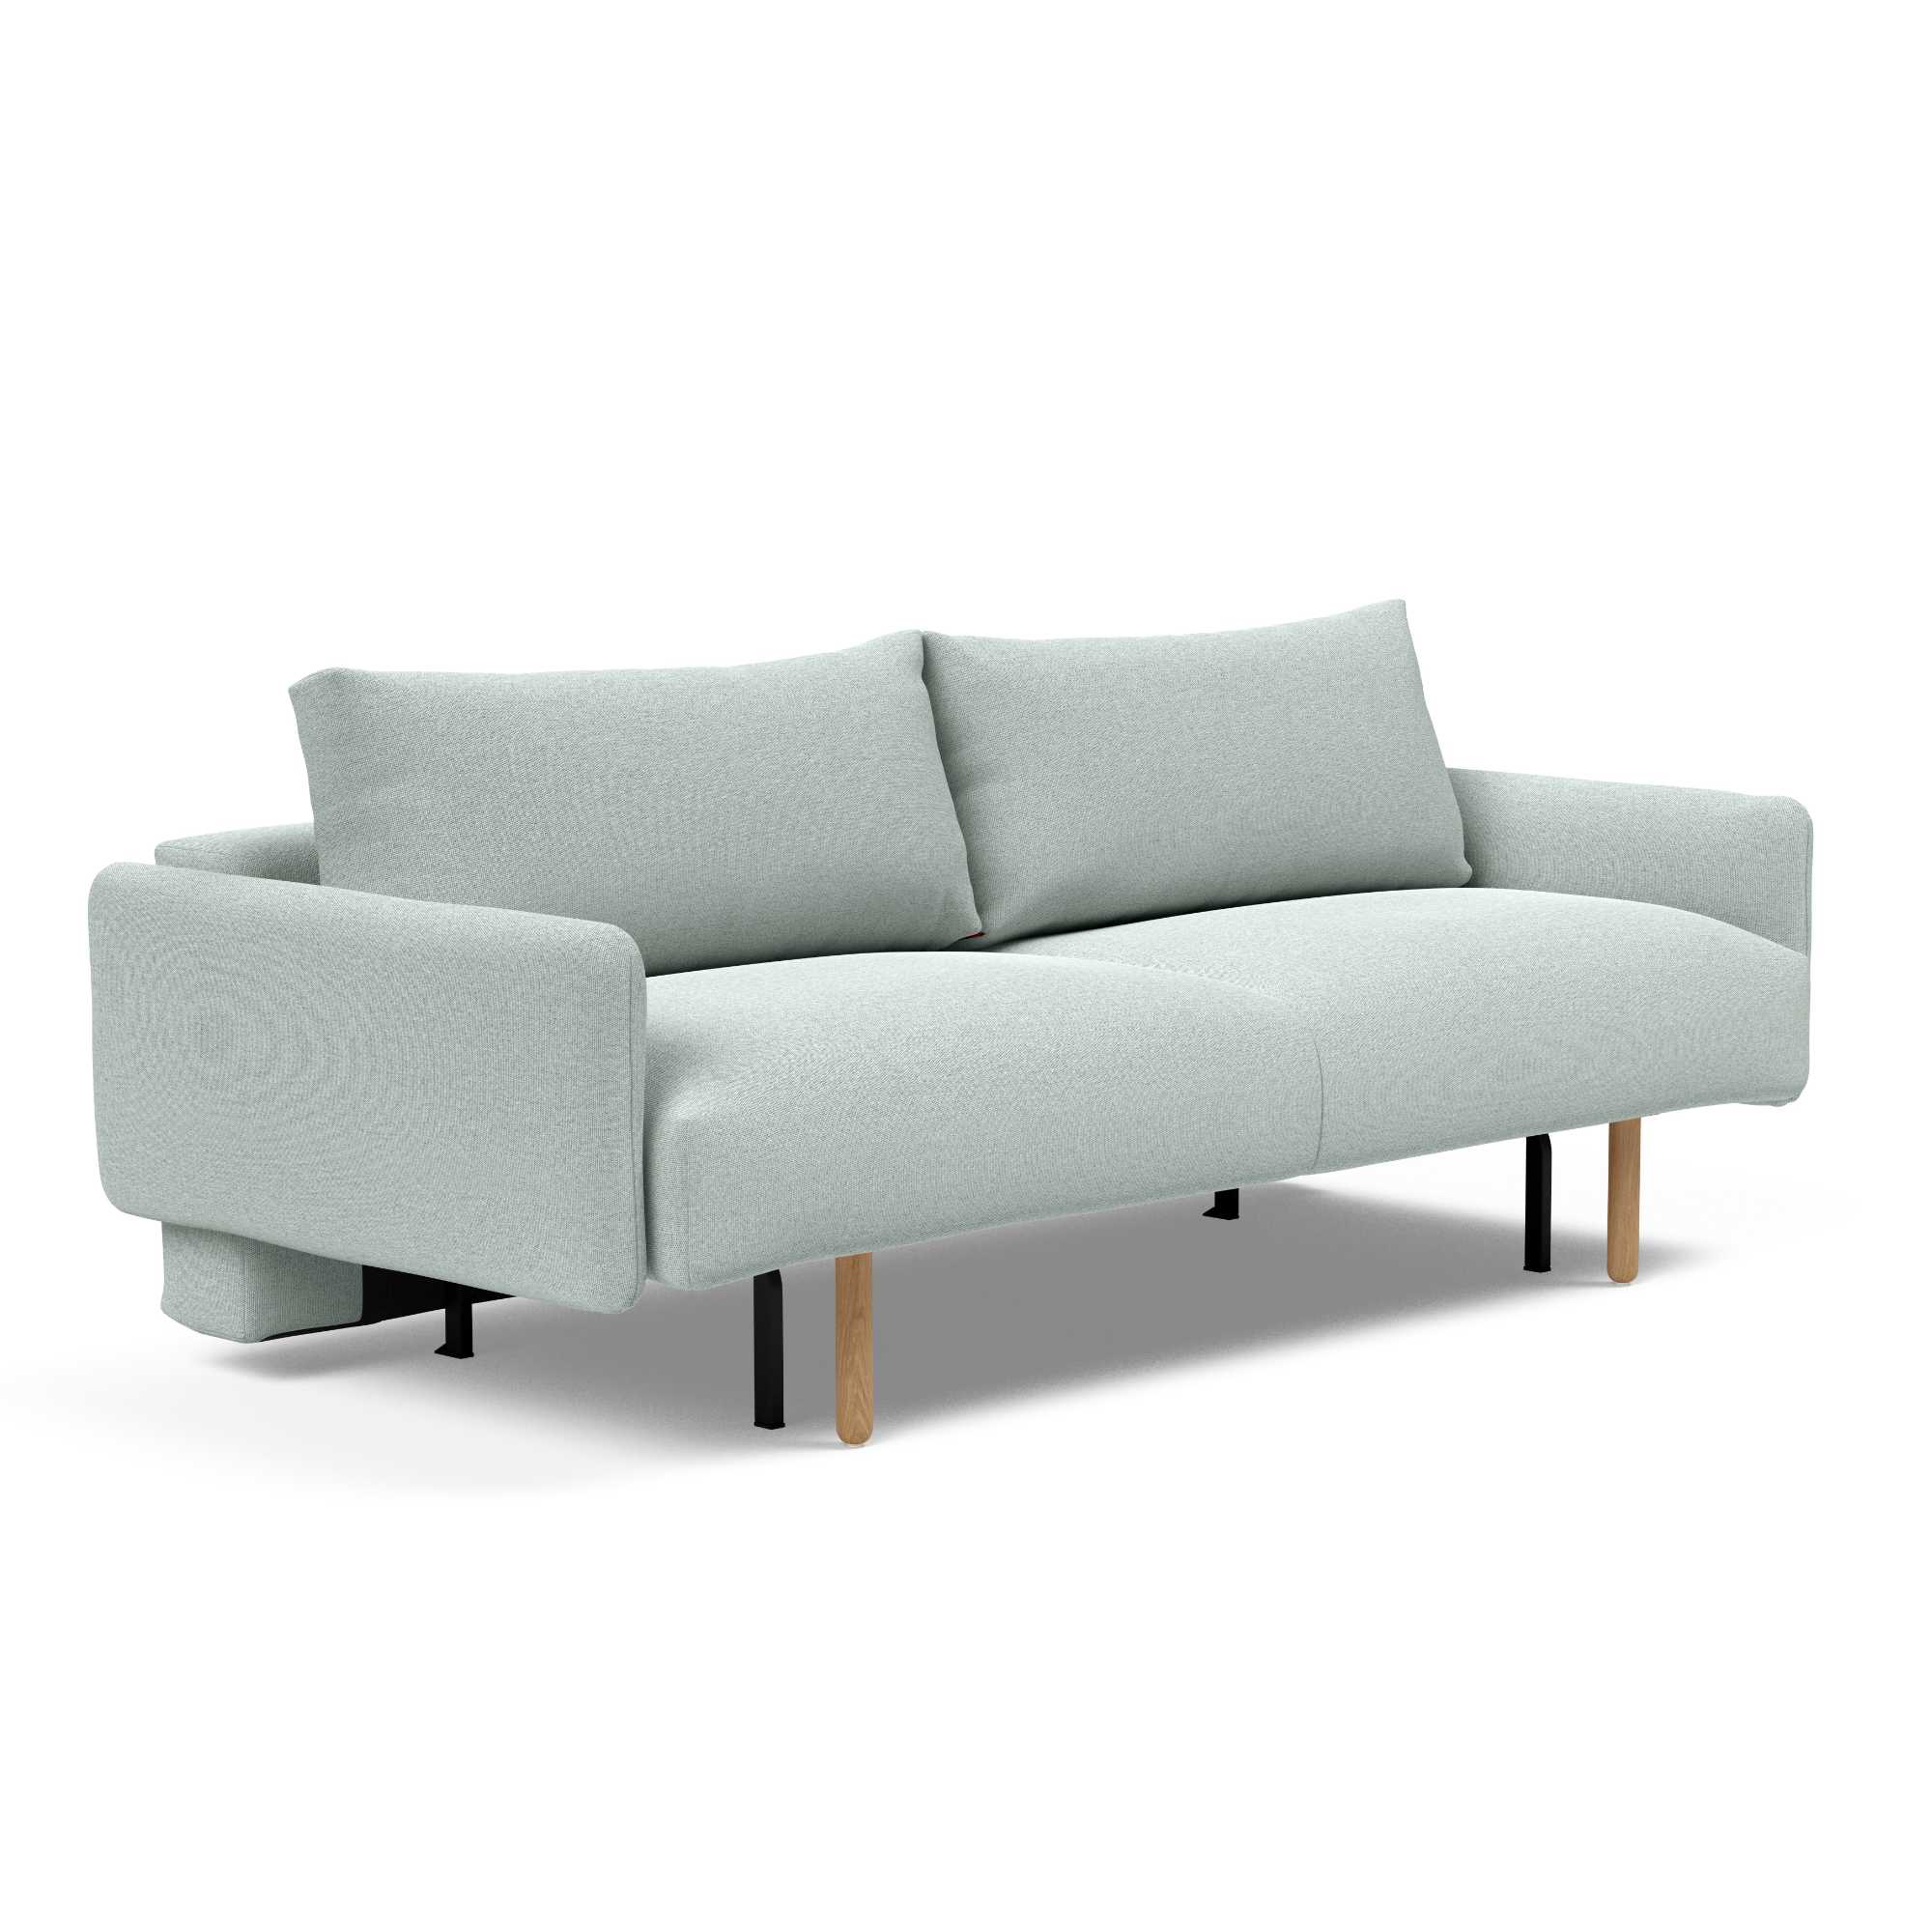 Innovation Living Frode Sofa Bed w. Arms, 552SoftPacificPearl w215xd105xh83cm